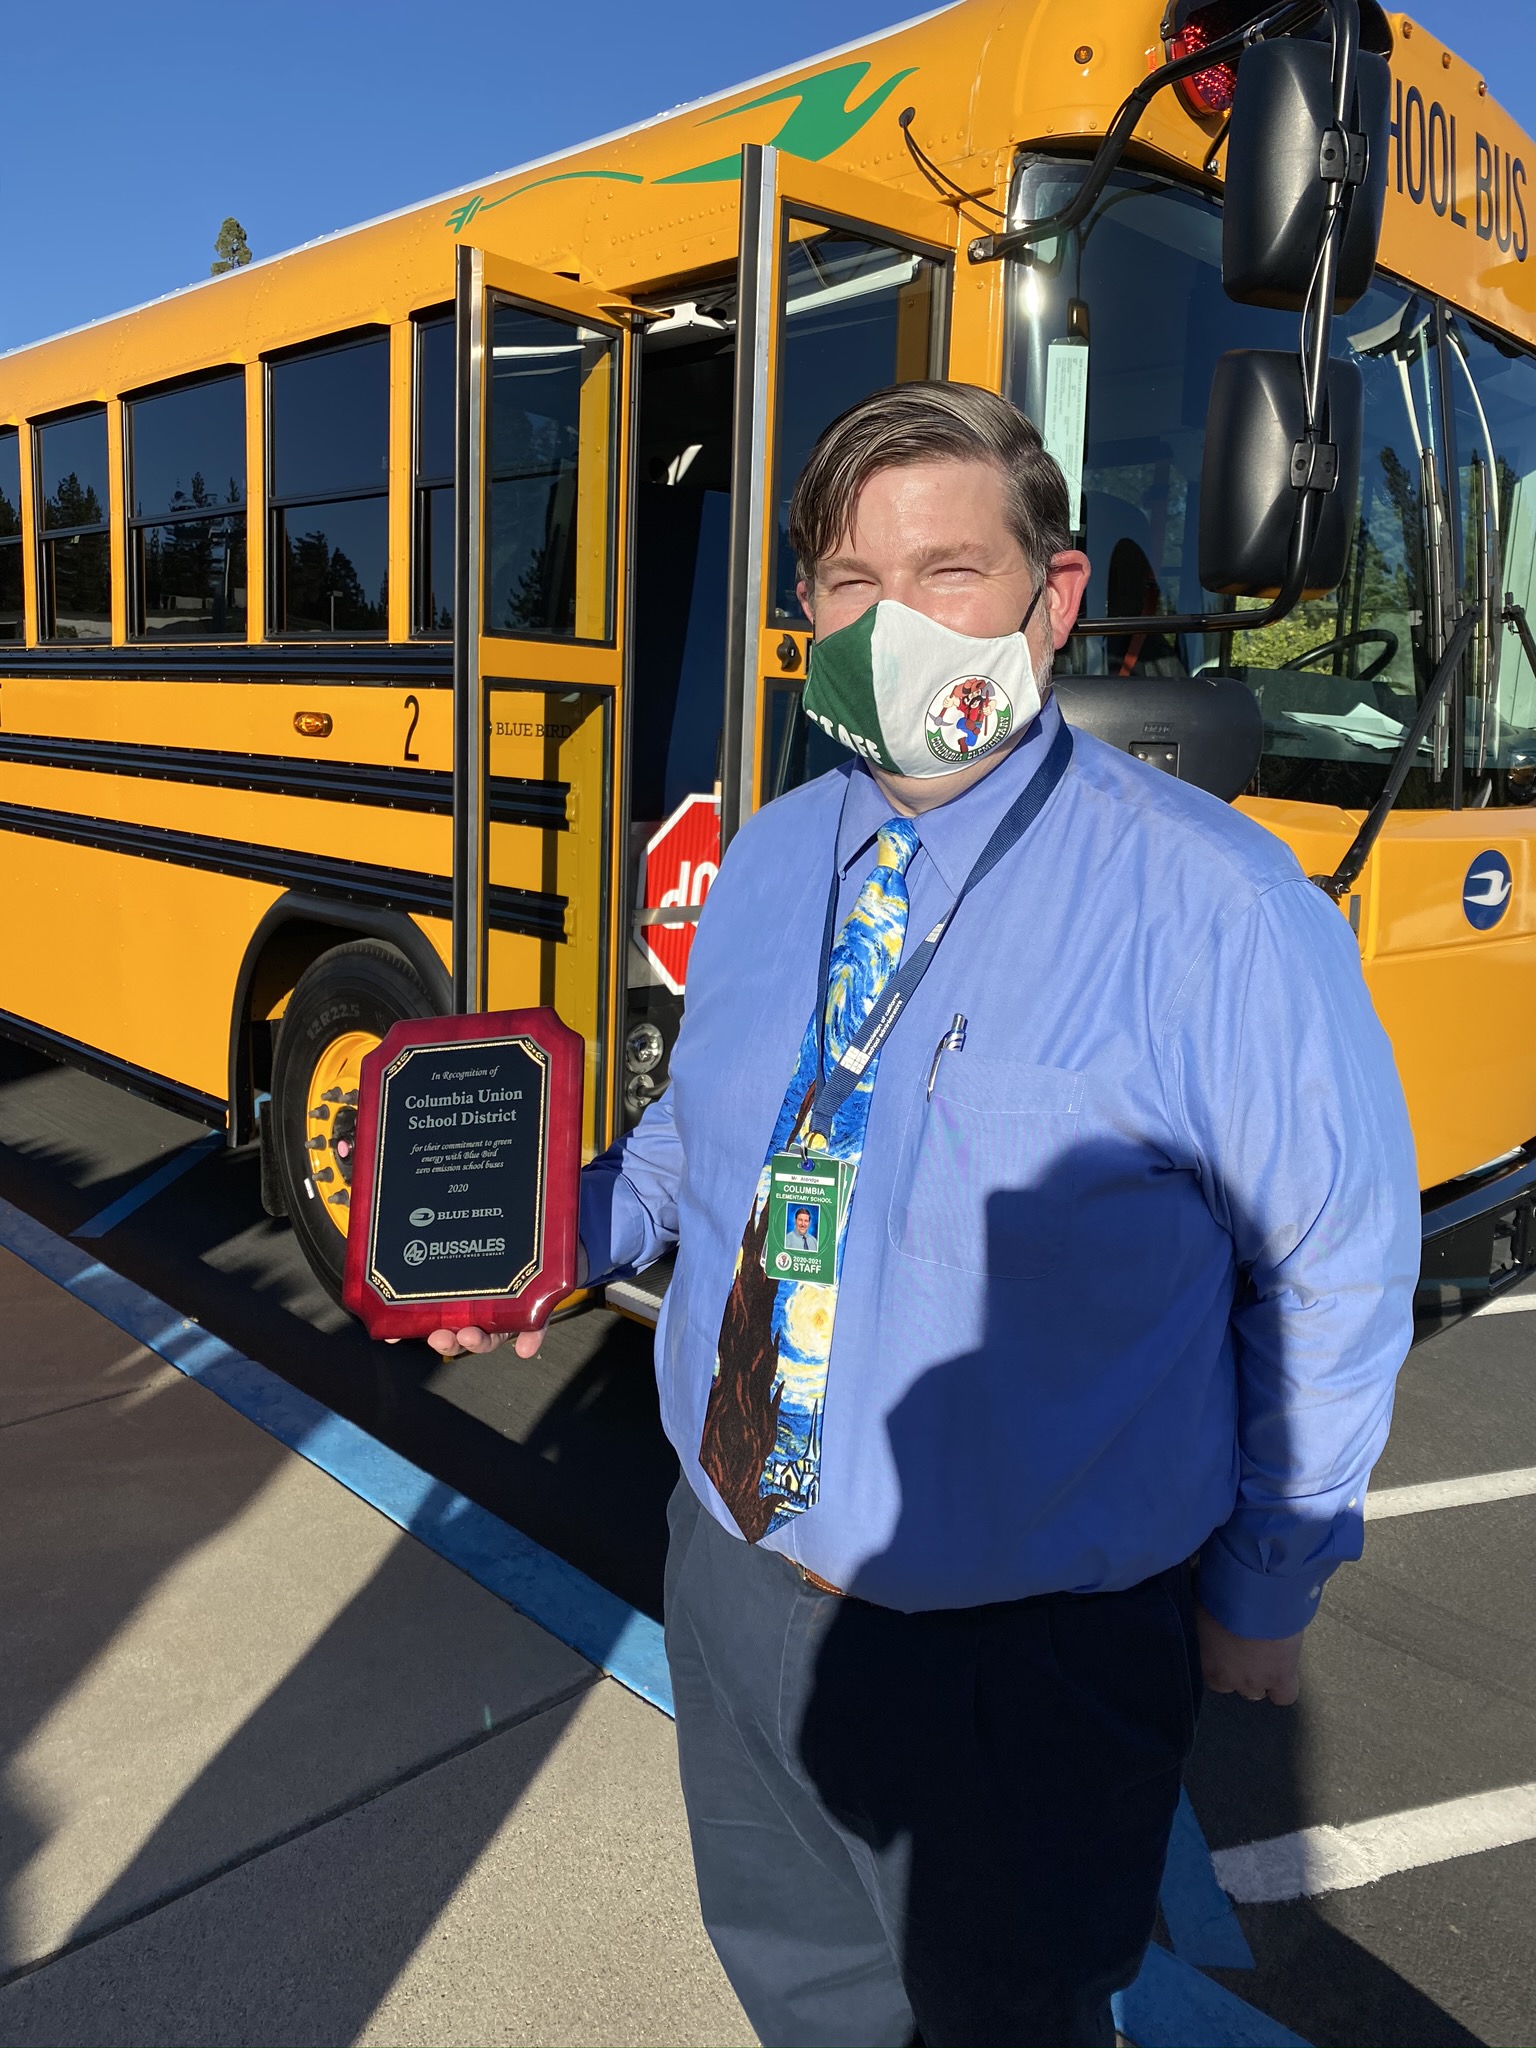 Joe Aldridge, Superintendent at Columbia Union School District accepting recognition plaque from A-Z Bus Sales for their commitment to green energy with Blue Bird zero emission school buses.